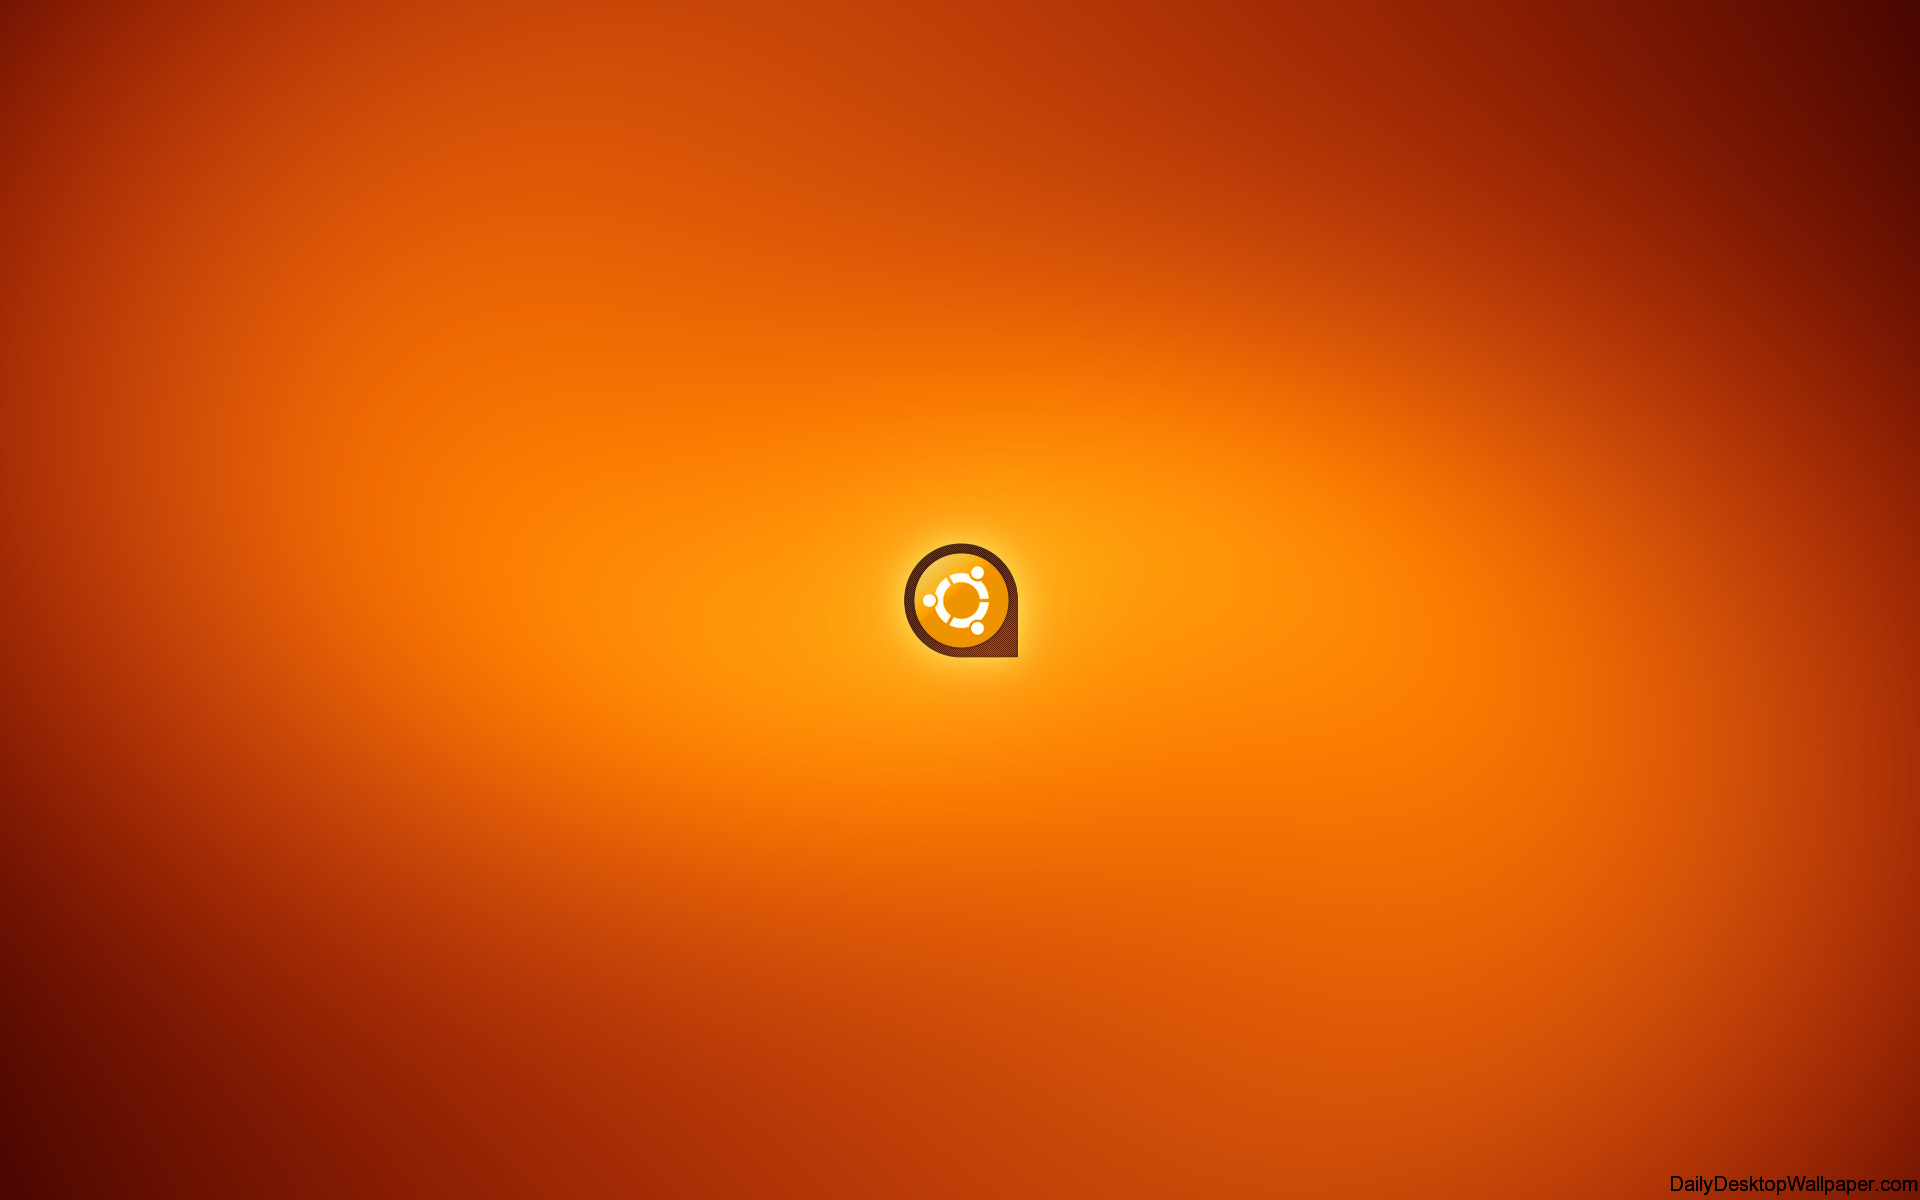 1920x1200 Bright Neon Orange Wallpaper This wallpaper is simple and